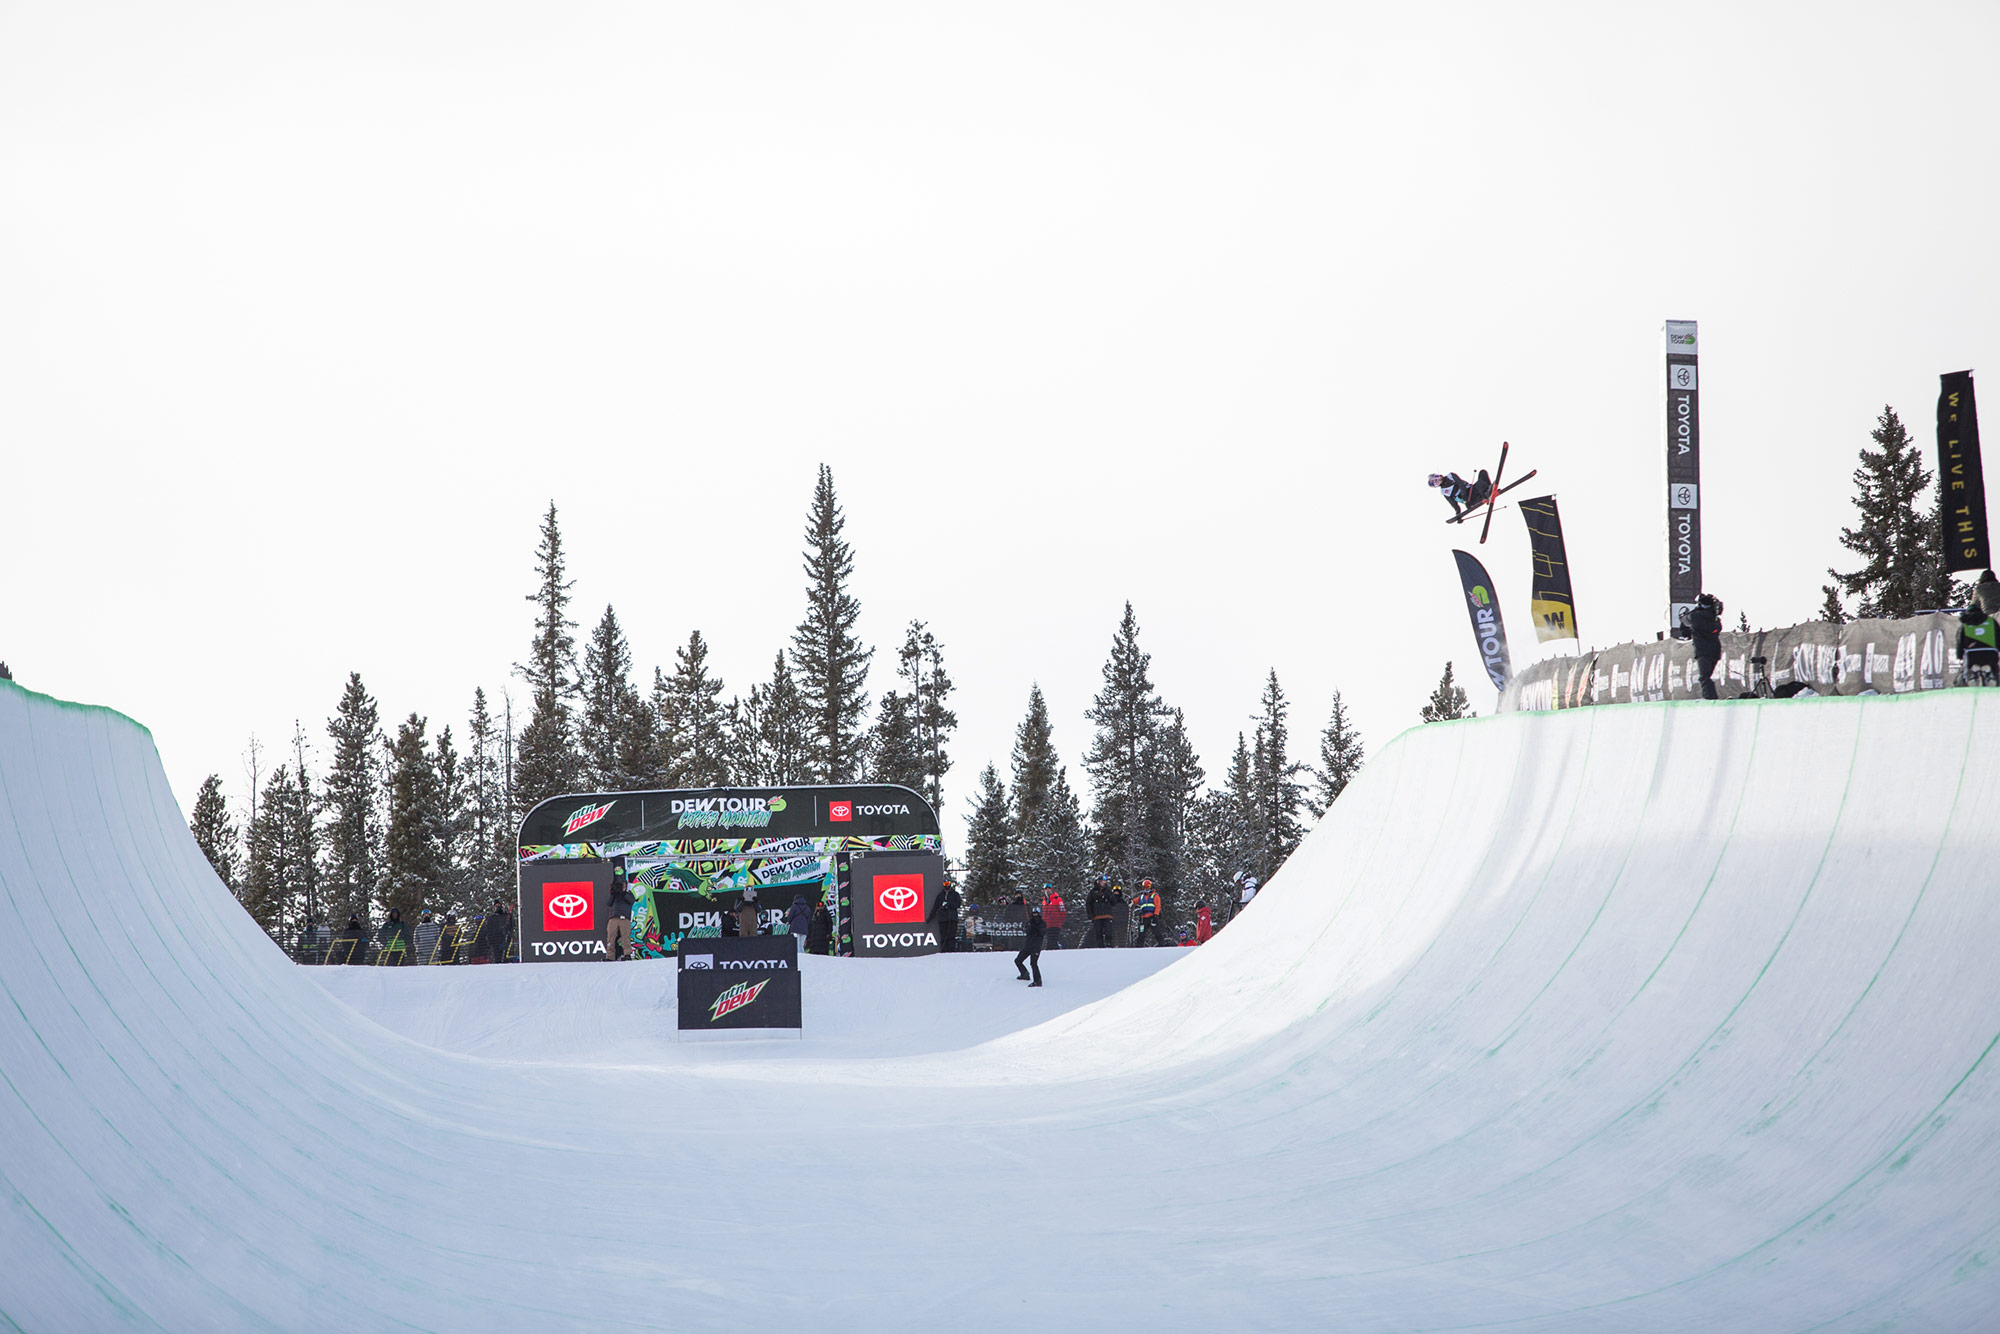 Eileen Gu competes in women's halfpipe finals at the 2021 Winter Dew tour in Copper Mountain, Colorado.